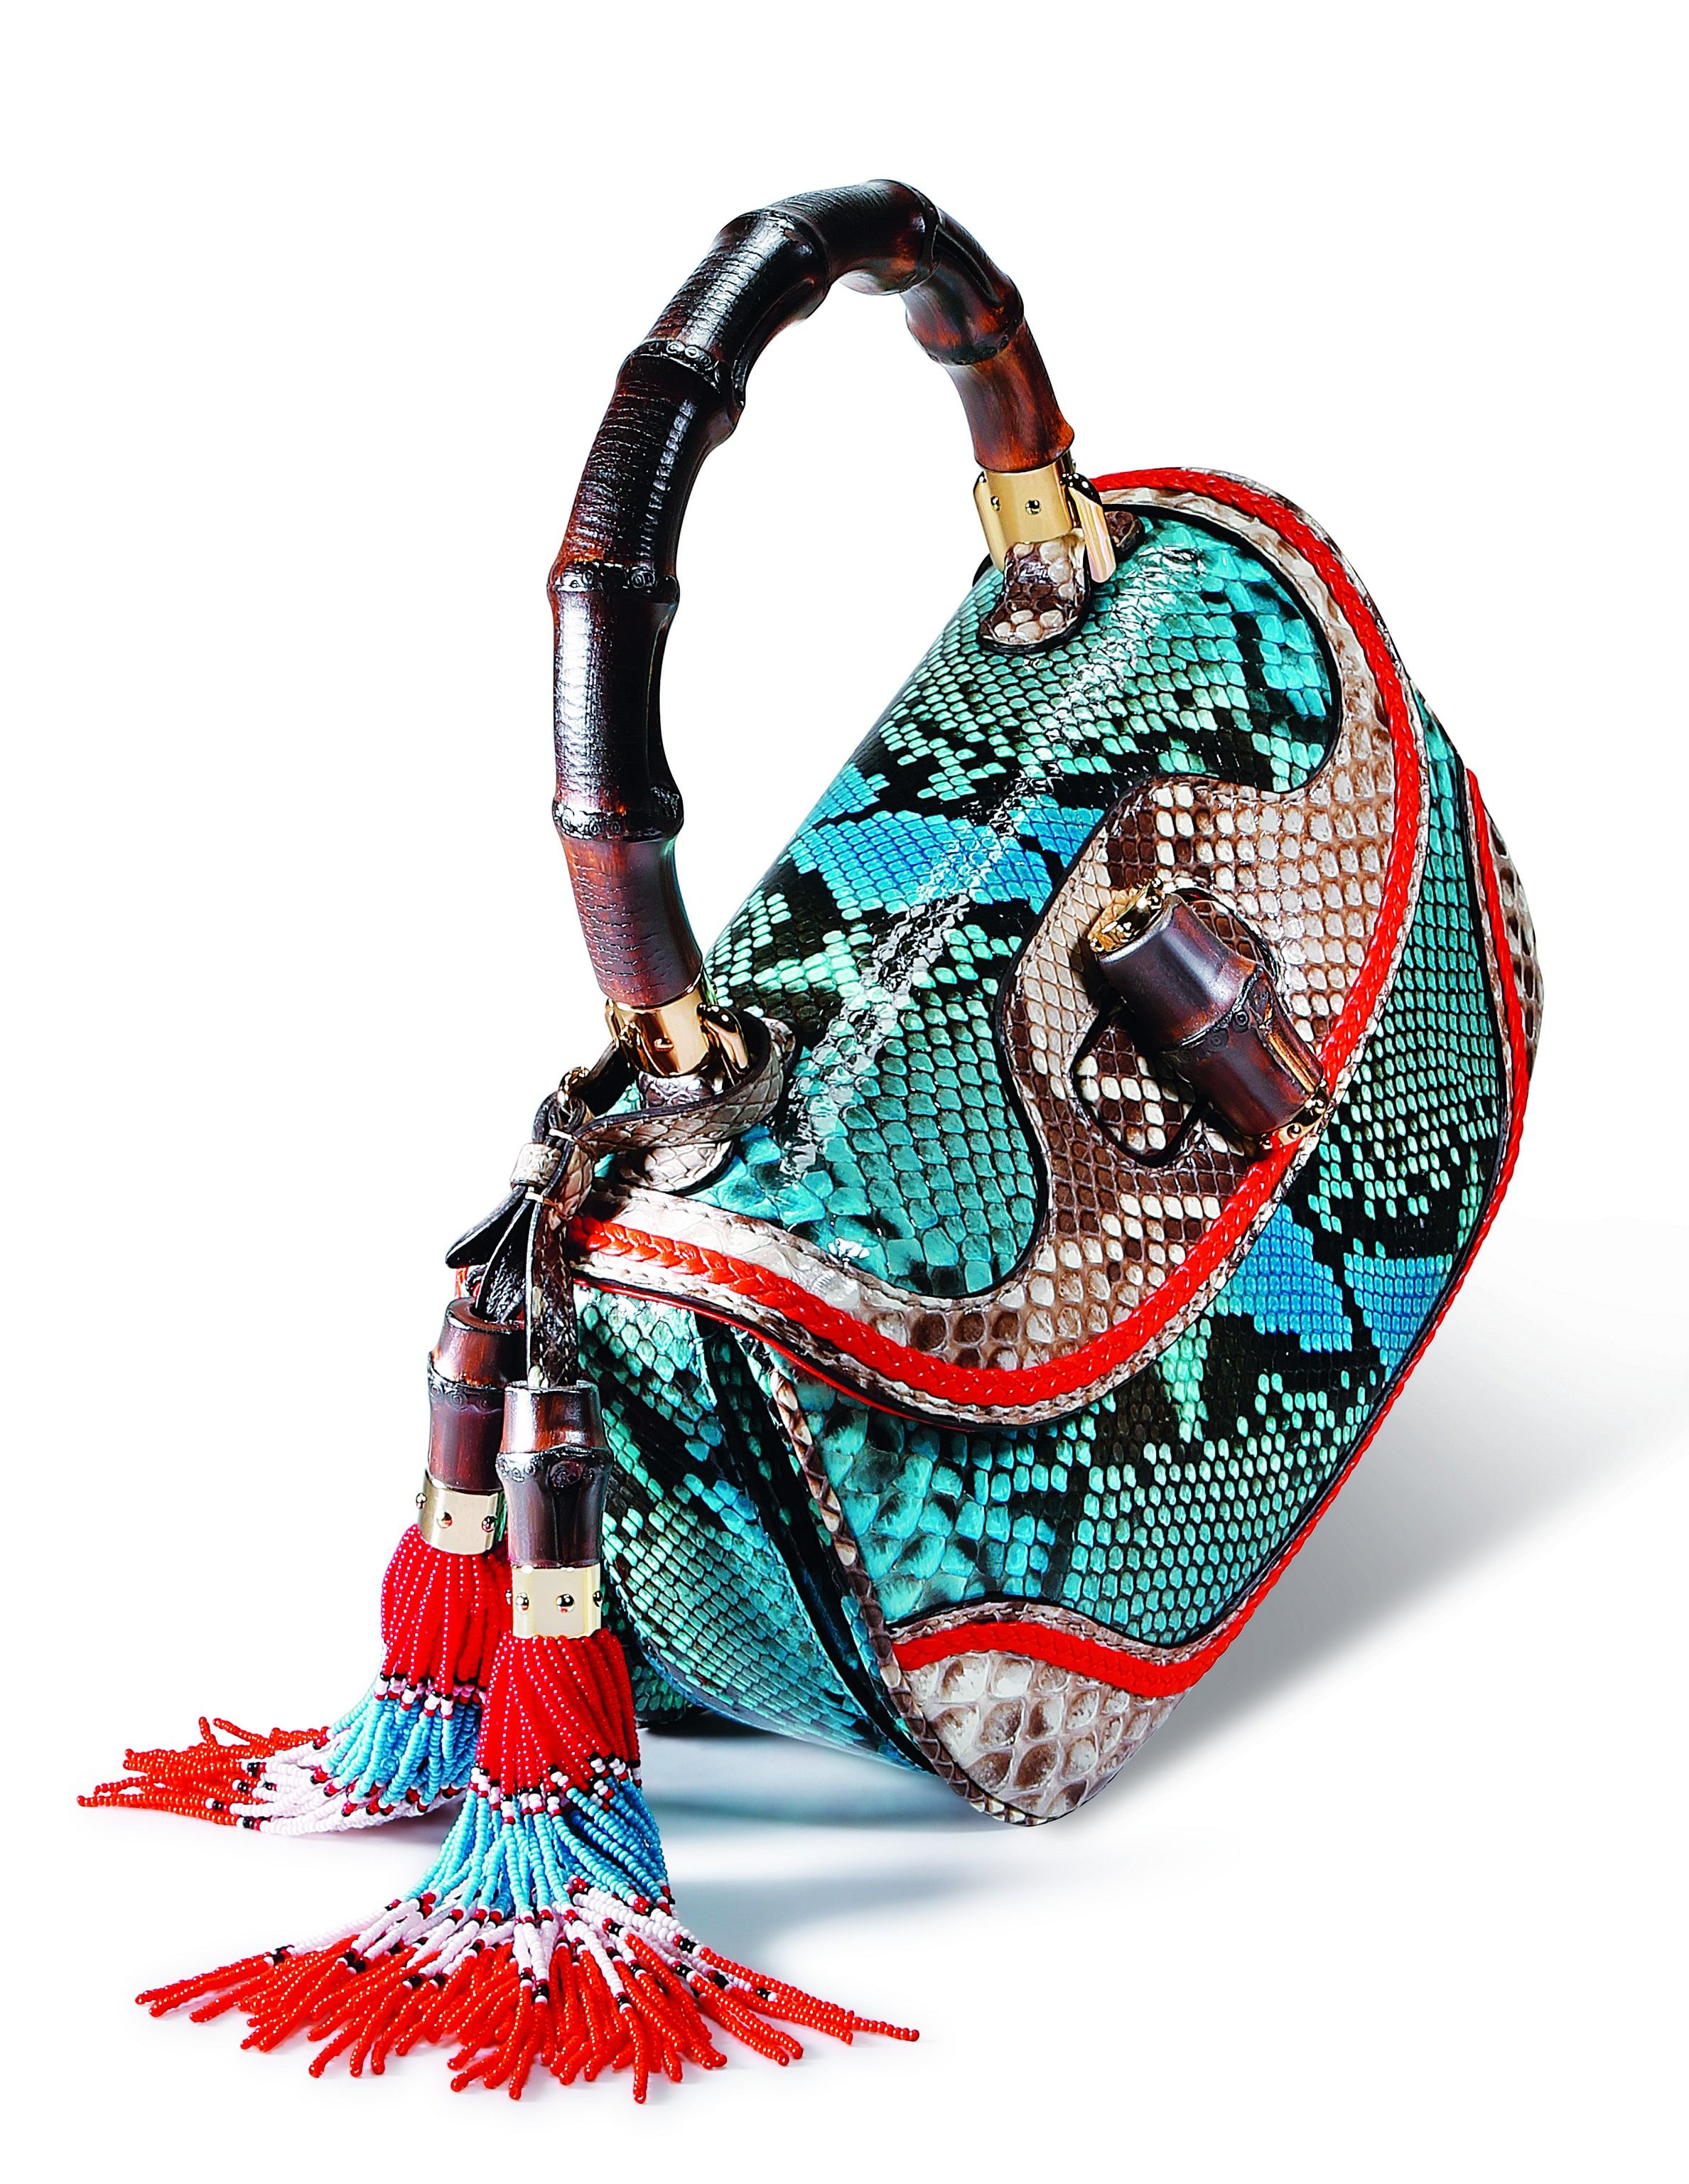 Most Wanted! Gucci Bamboo Python Bag - Harper's Bazaar Singapore